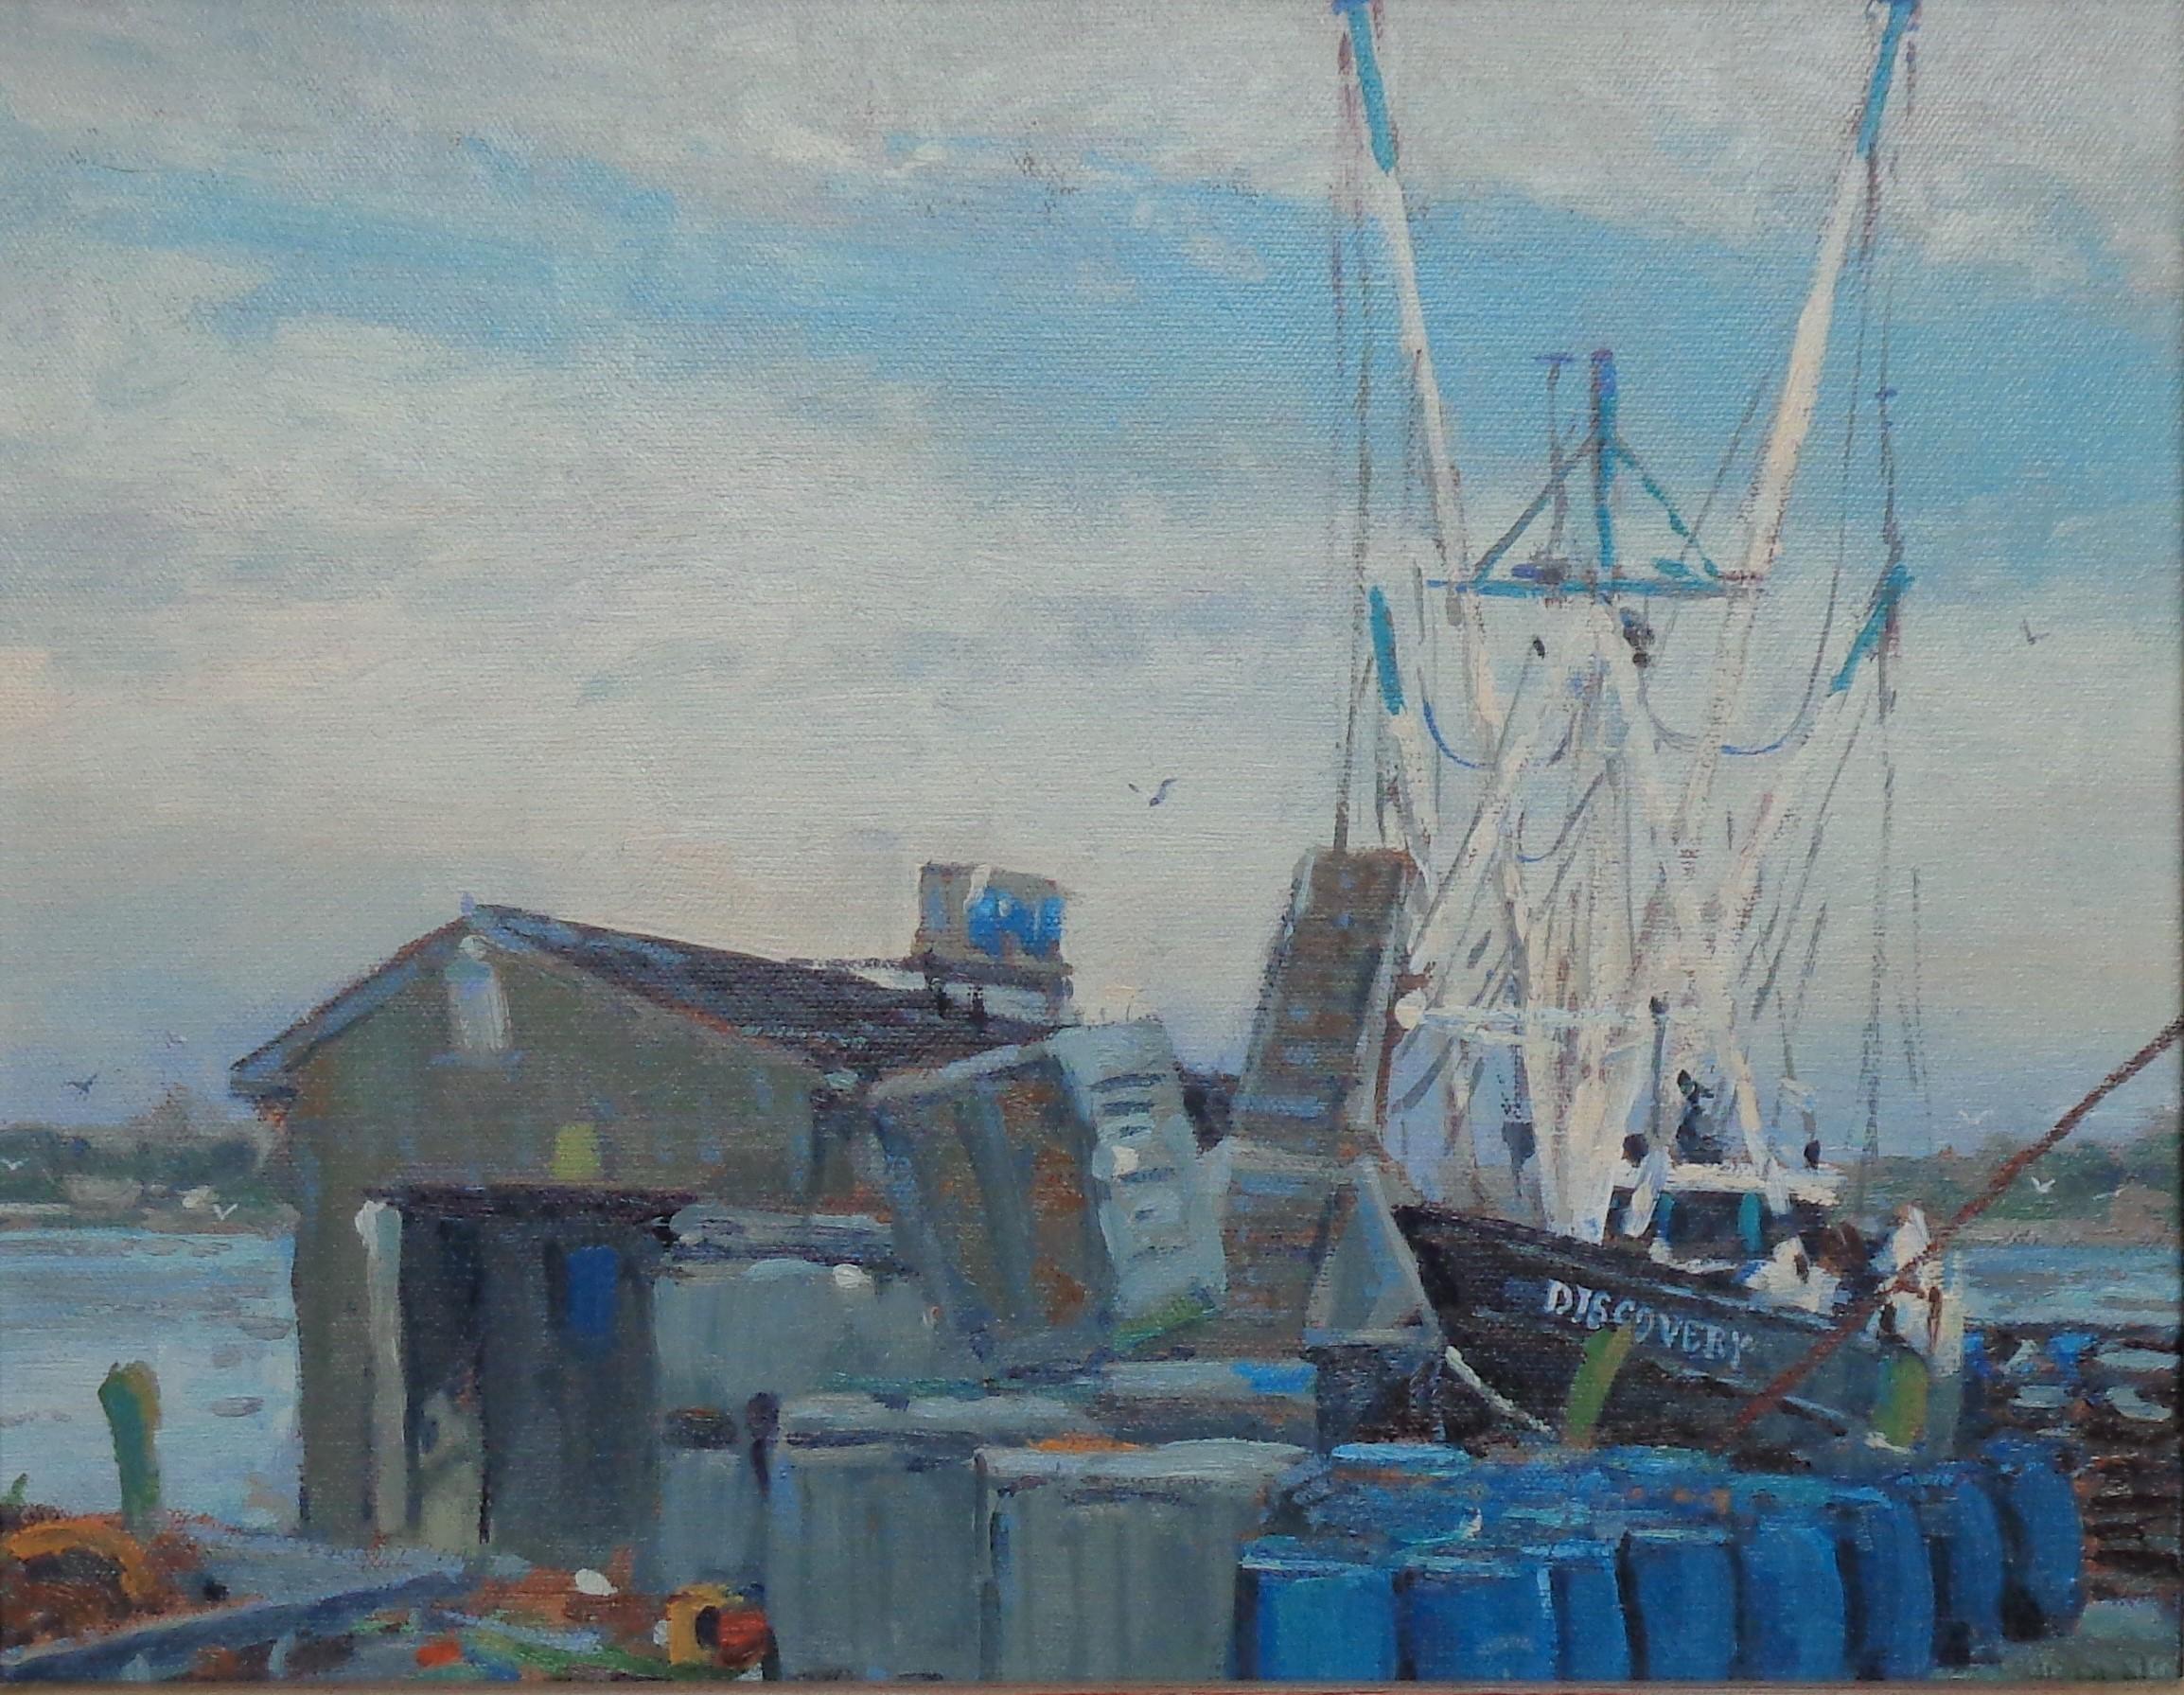 The Discovery
oil/canvas
11 x 14 image unframed
An oil painting on canvas by award winning contemporary artist Michael Budden that showcases a study of light hitting the docked boat at one of his favorite places in NJ to paint on location, Pt.